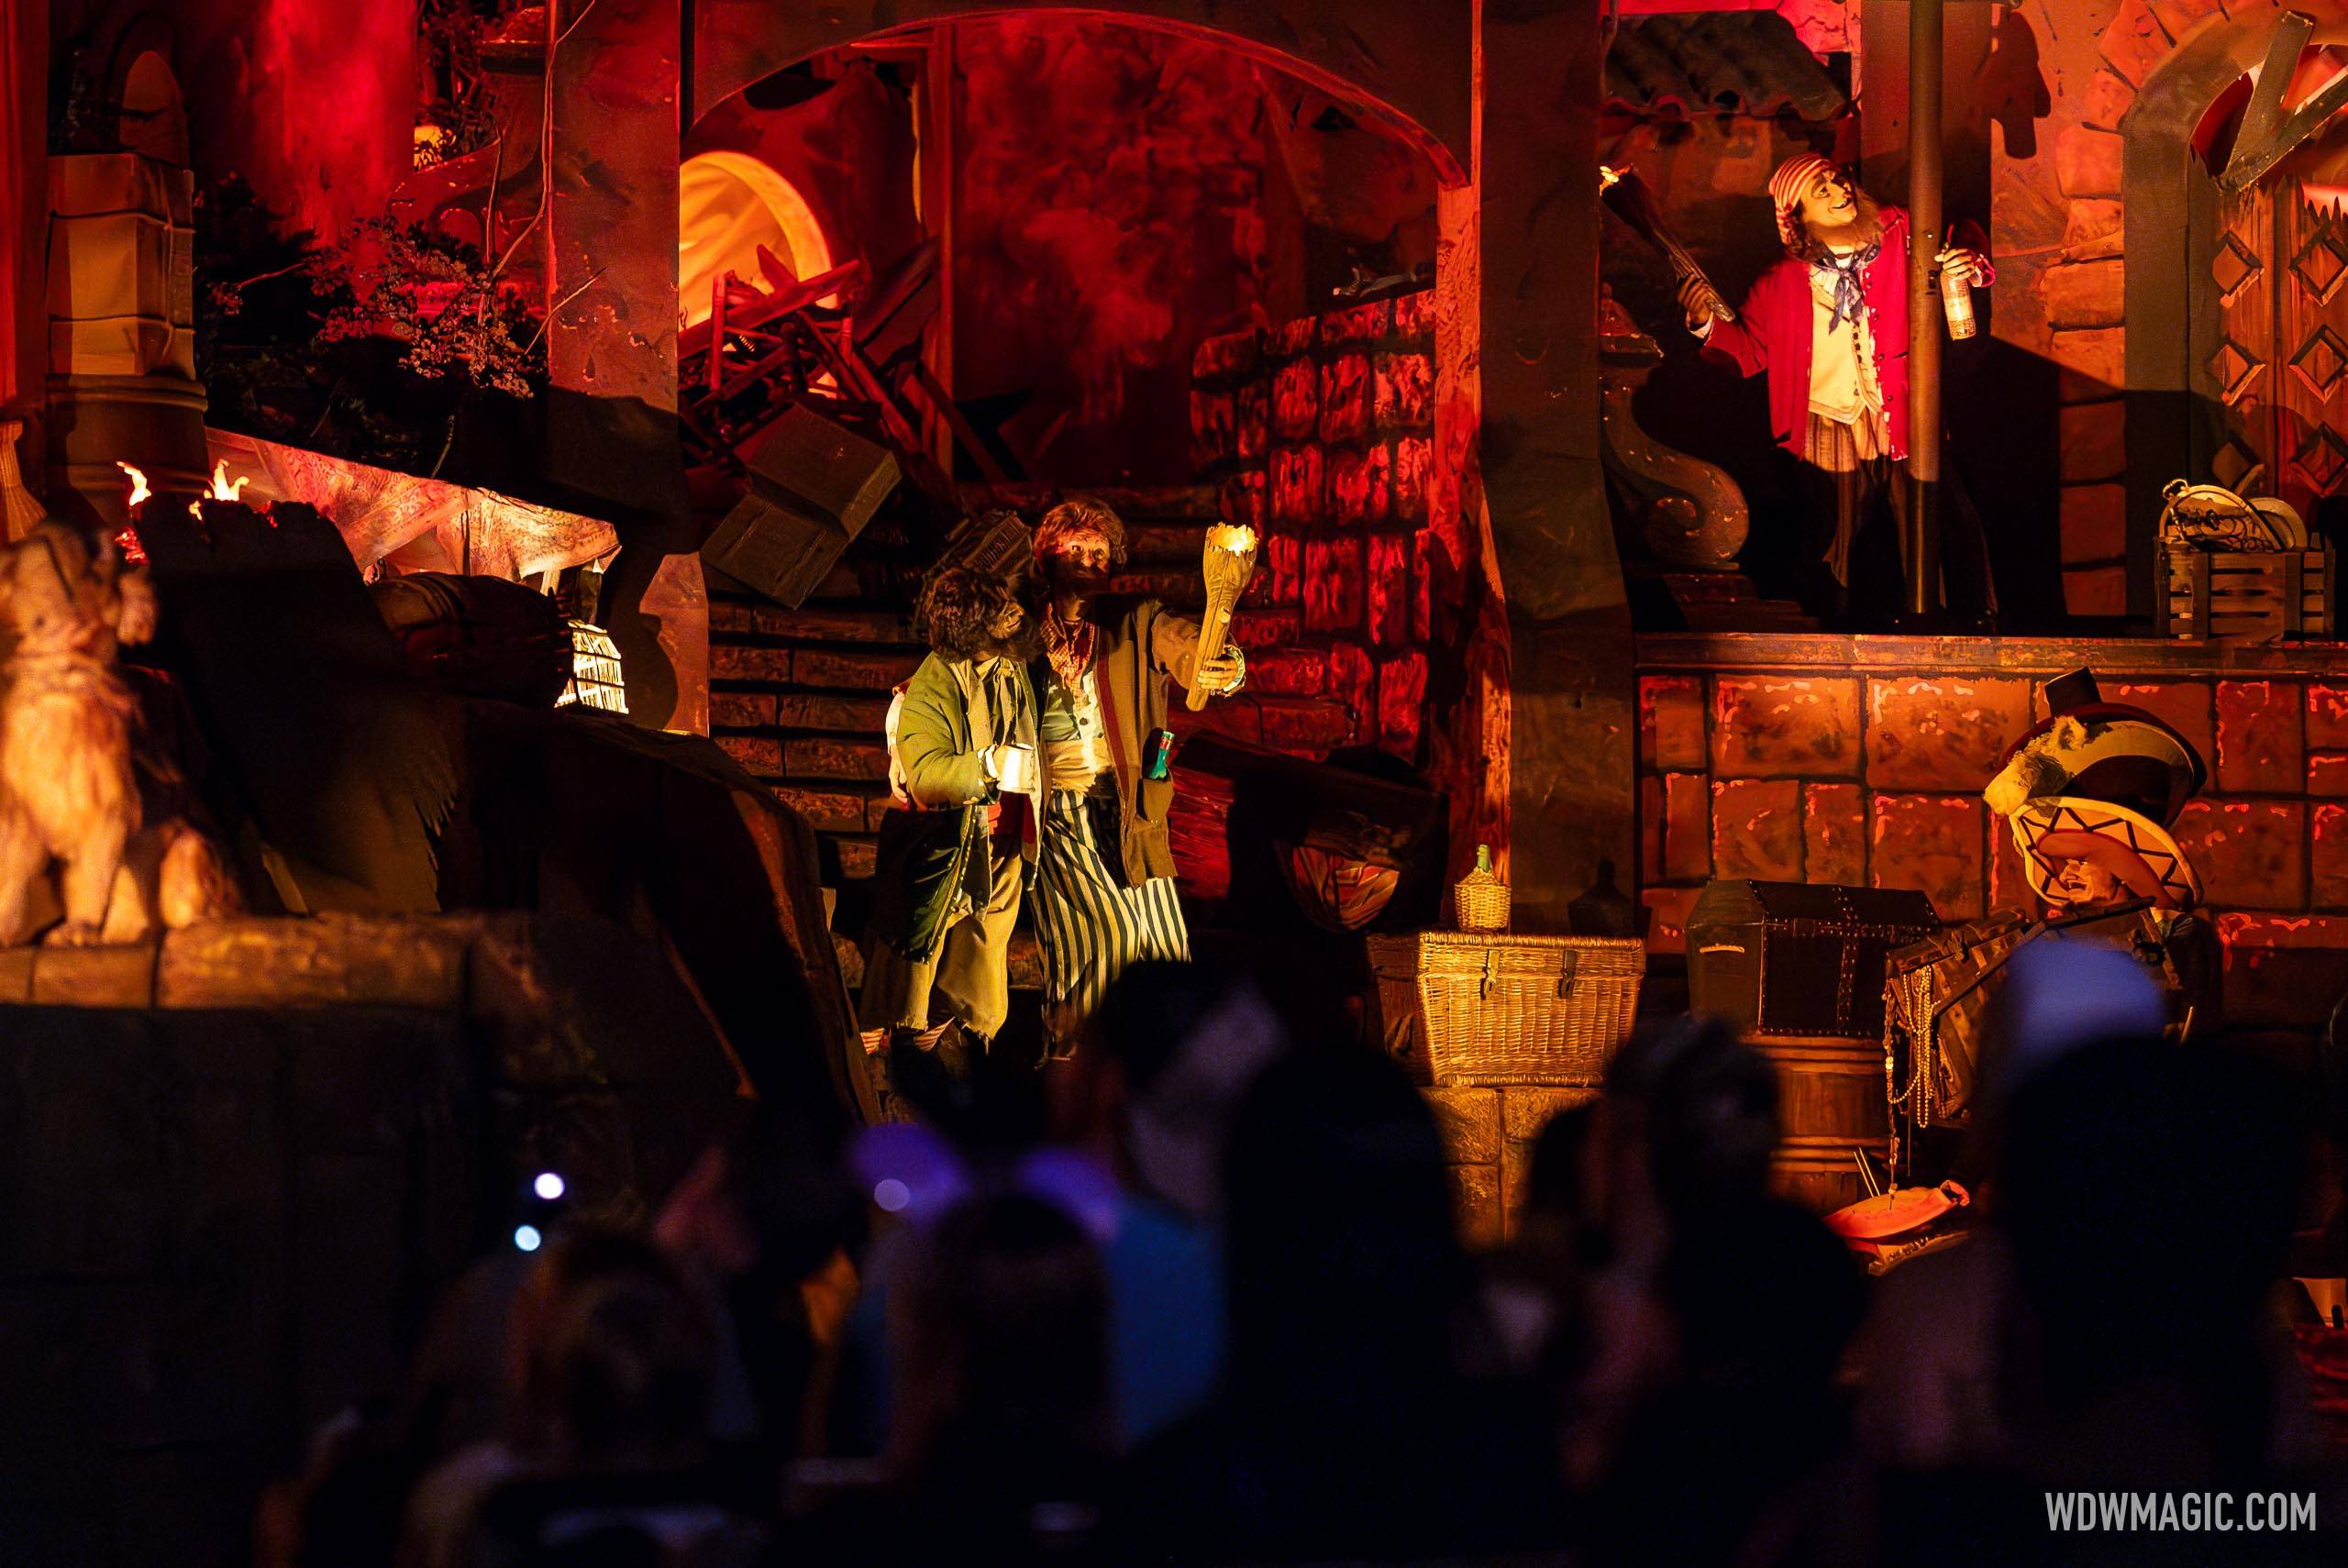 Pirates of the Caribbean show scenes